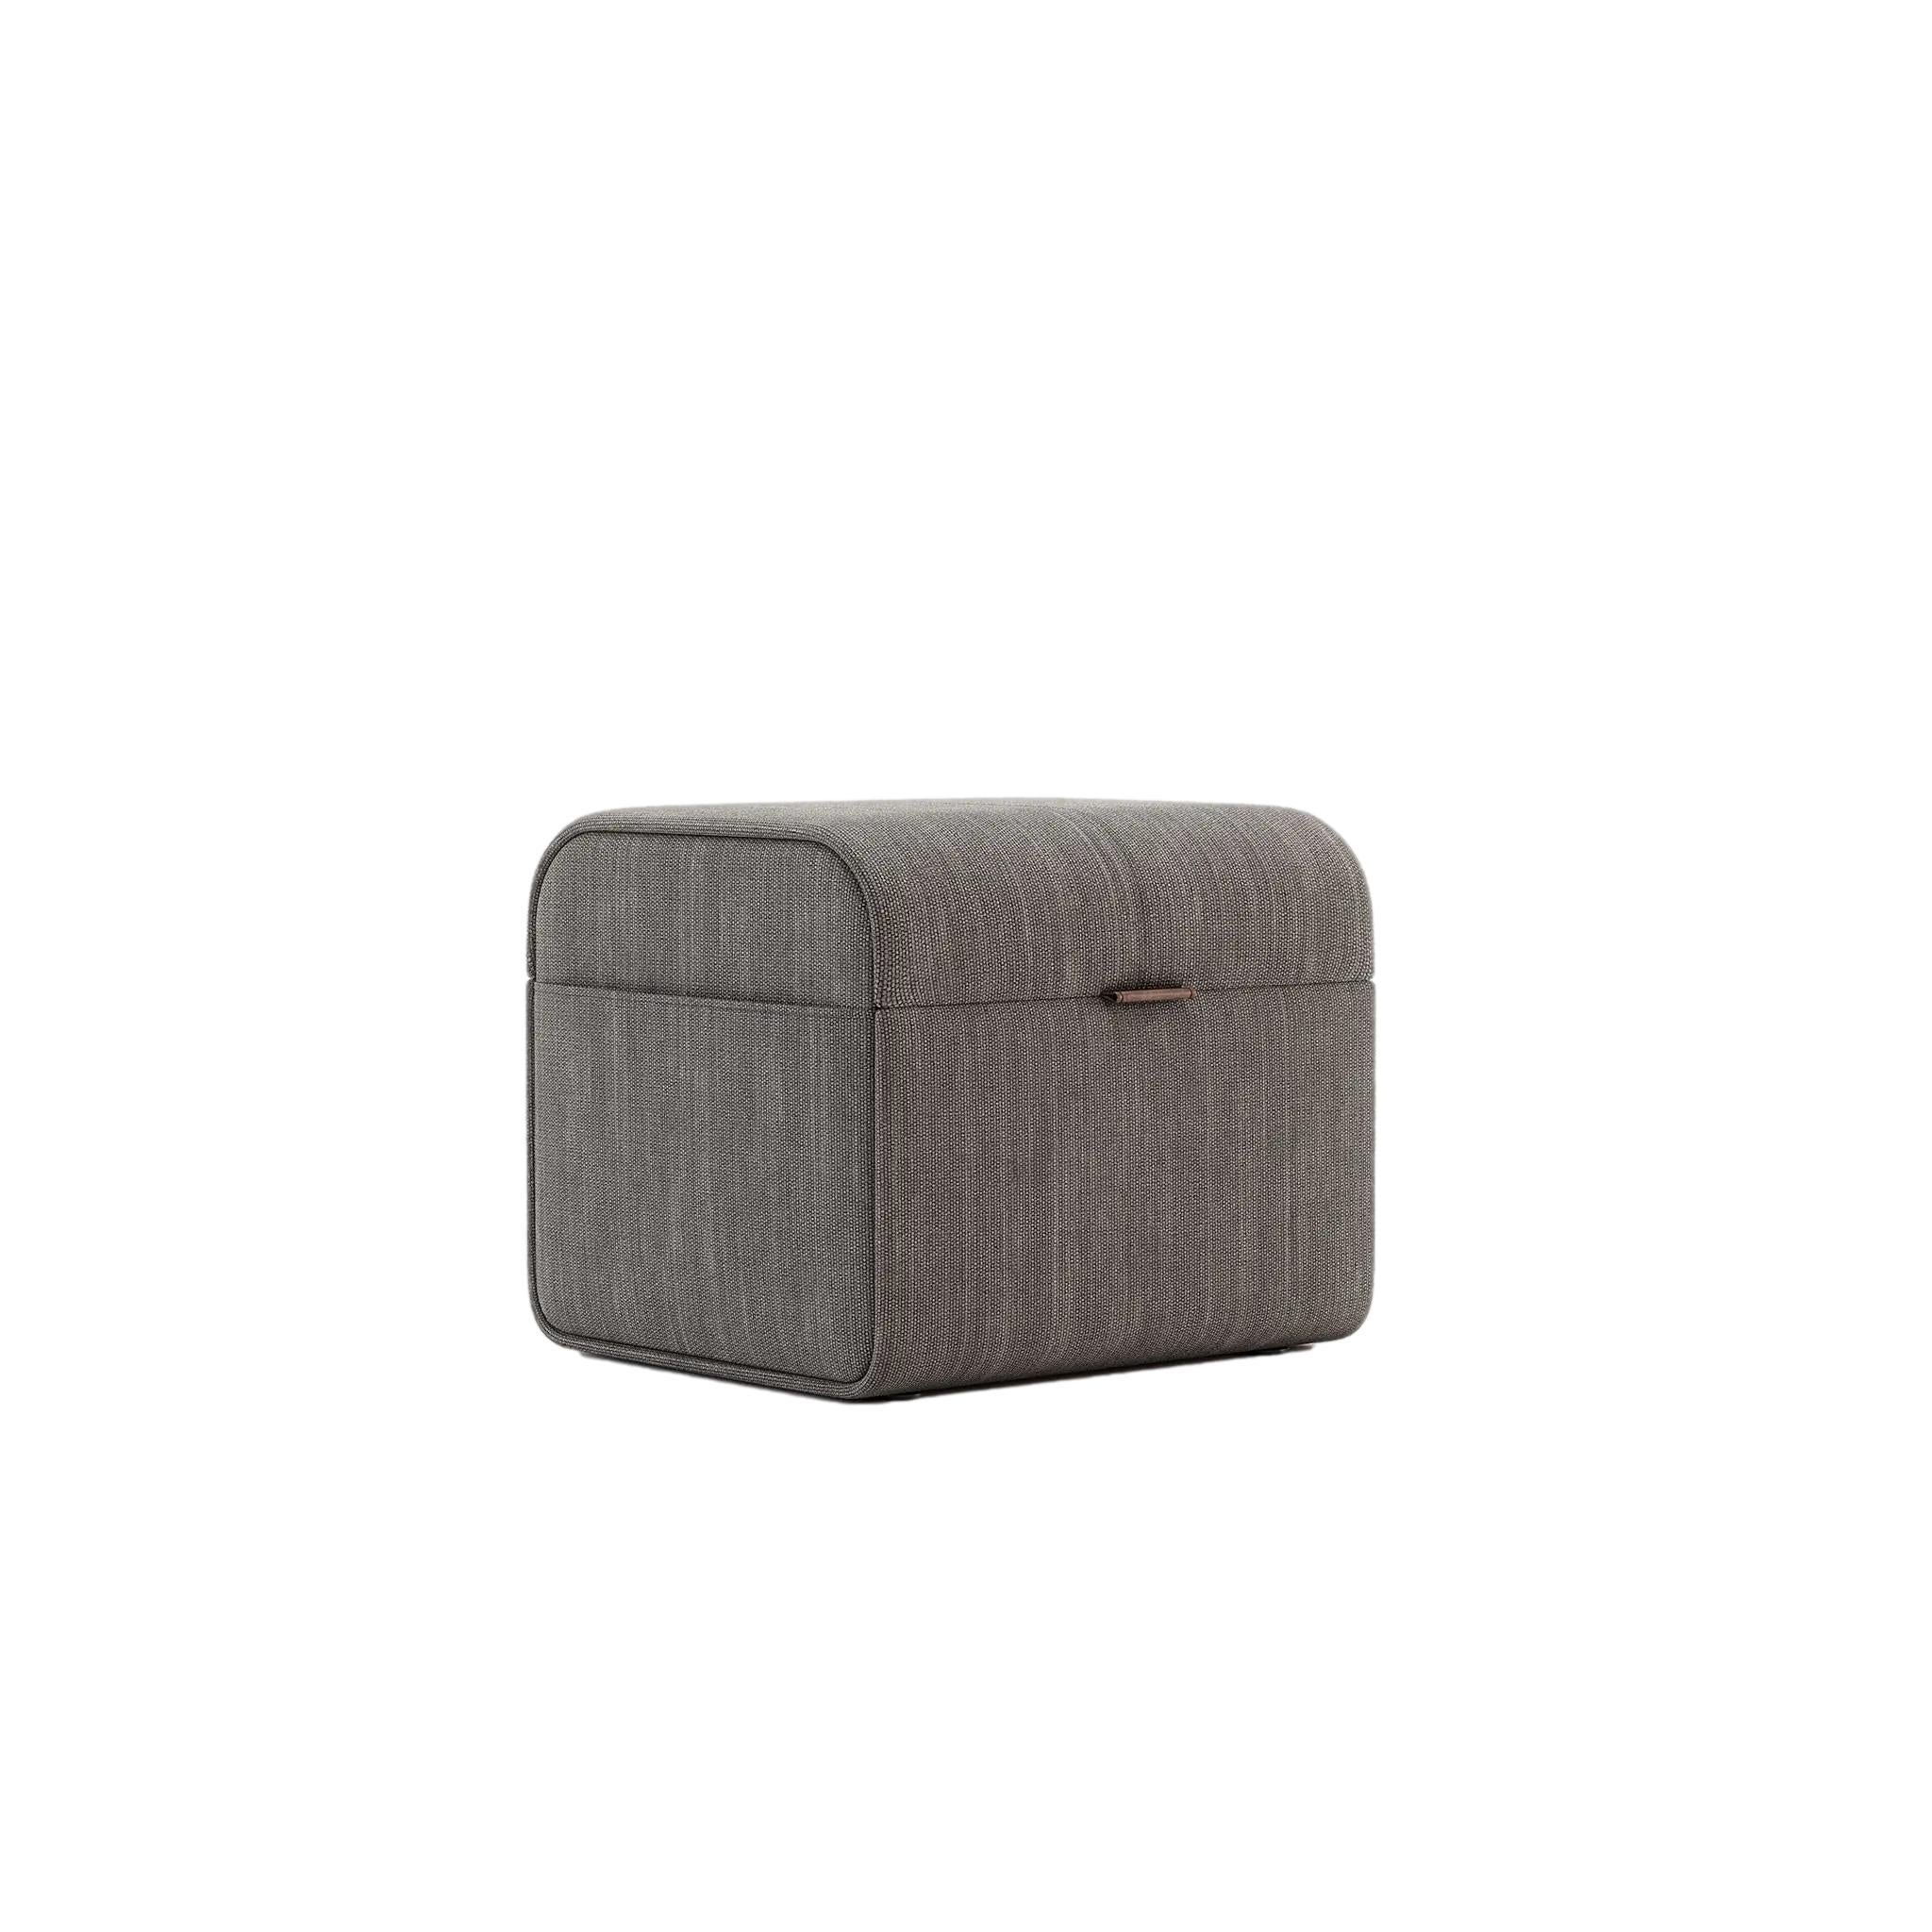 With a modern take on the traditional shapes and patterns of history, this pouf opens the door to a purposeful world, serving as a storage piece or even as additional seating. An effortless opening system takes over the contemporary field and gives